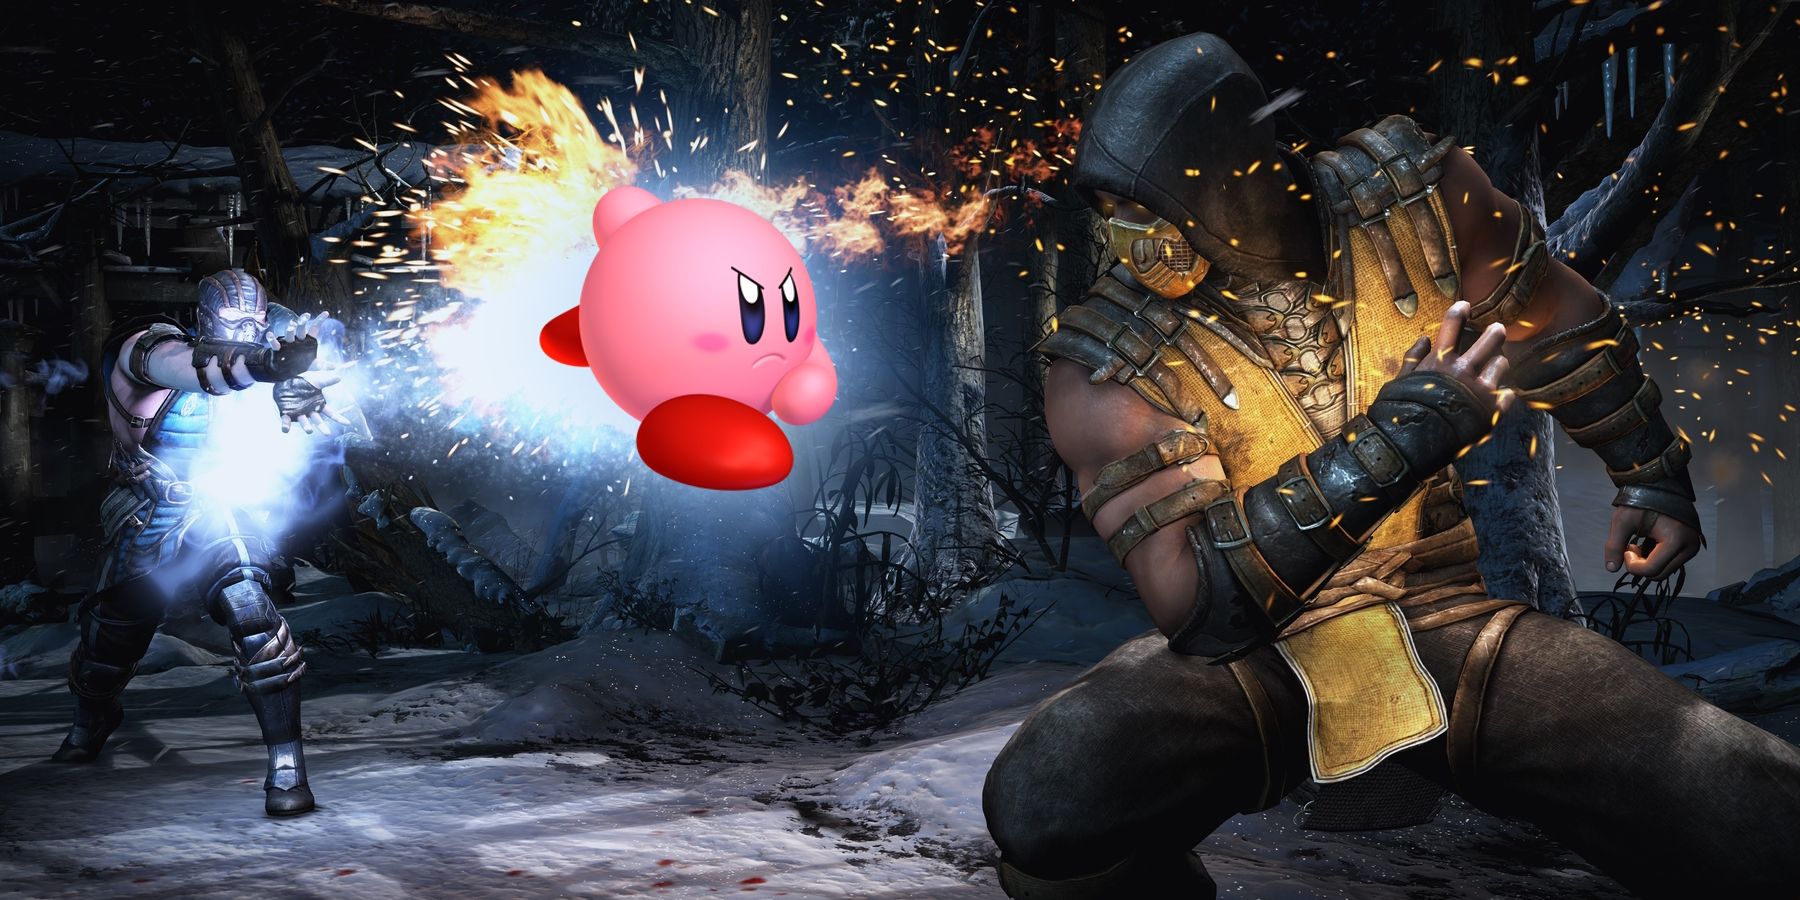 Sub-Zero and Scorpion from Mortal Kombat 11 with Kirby superimposed over the fight